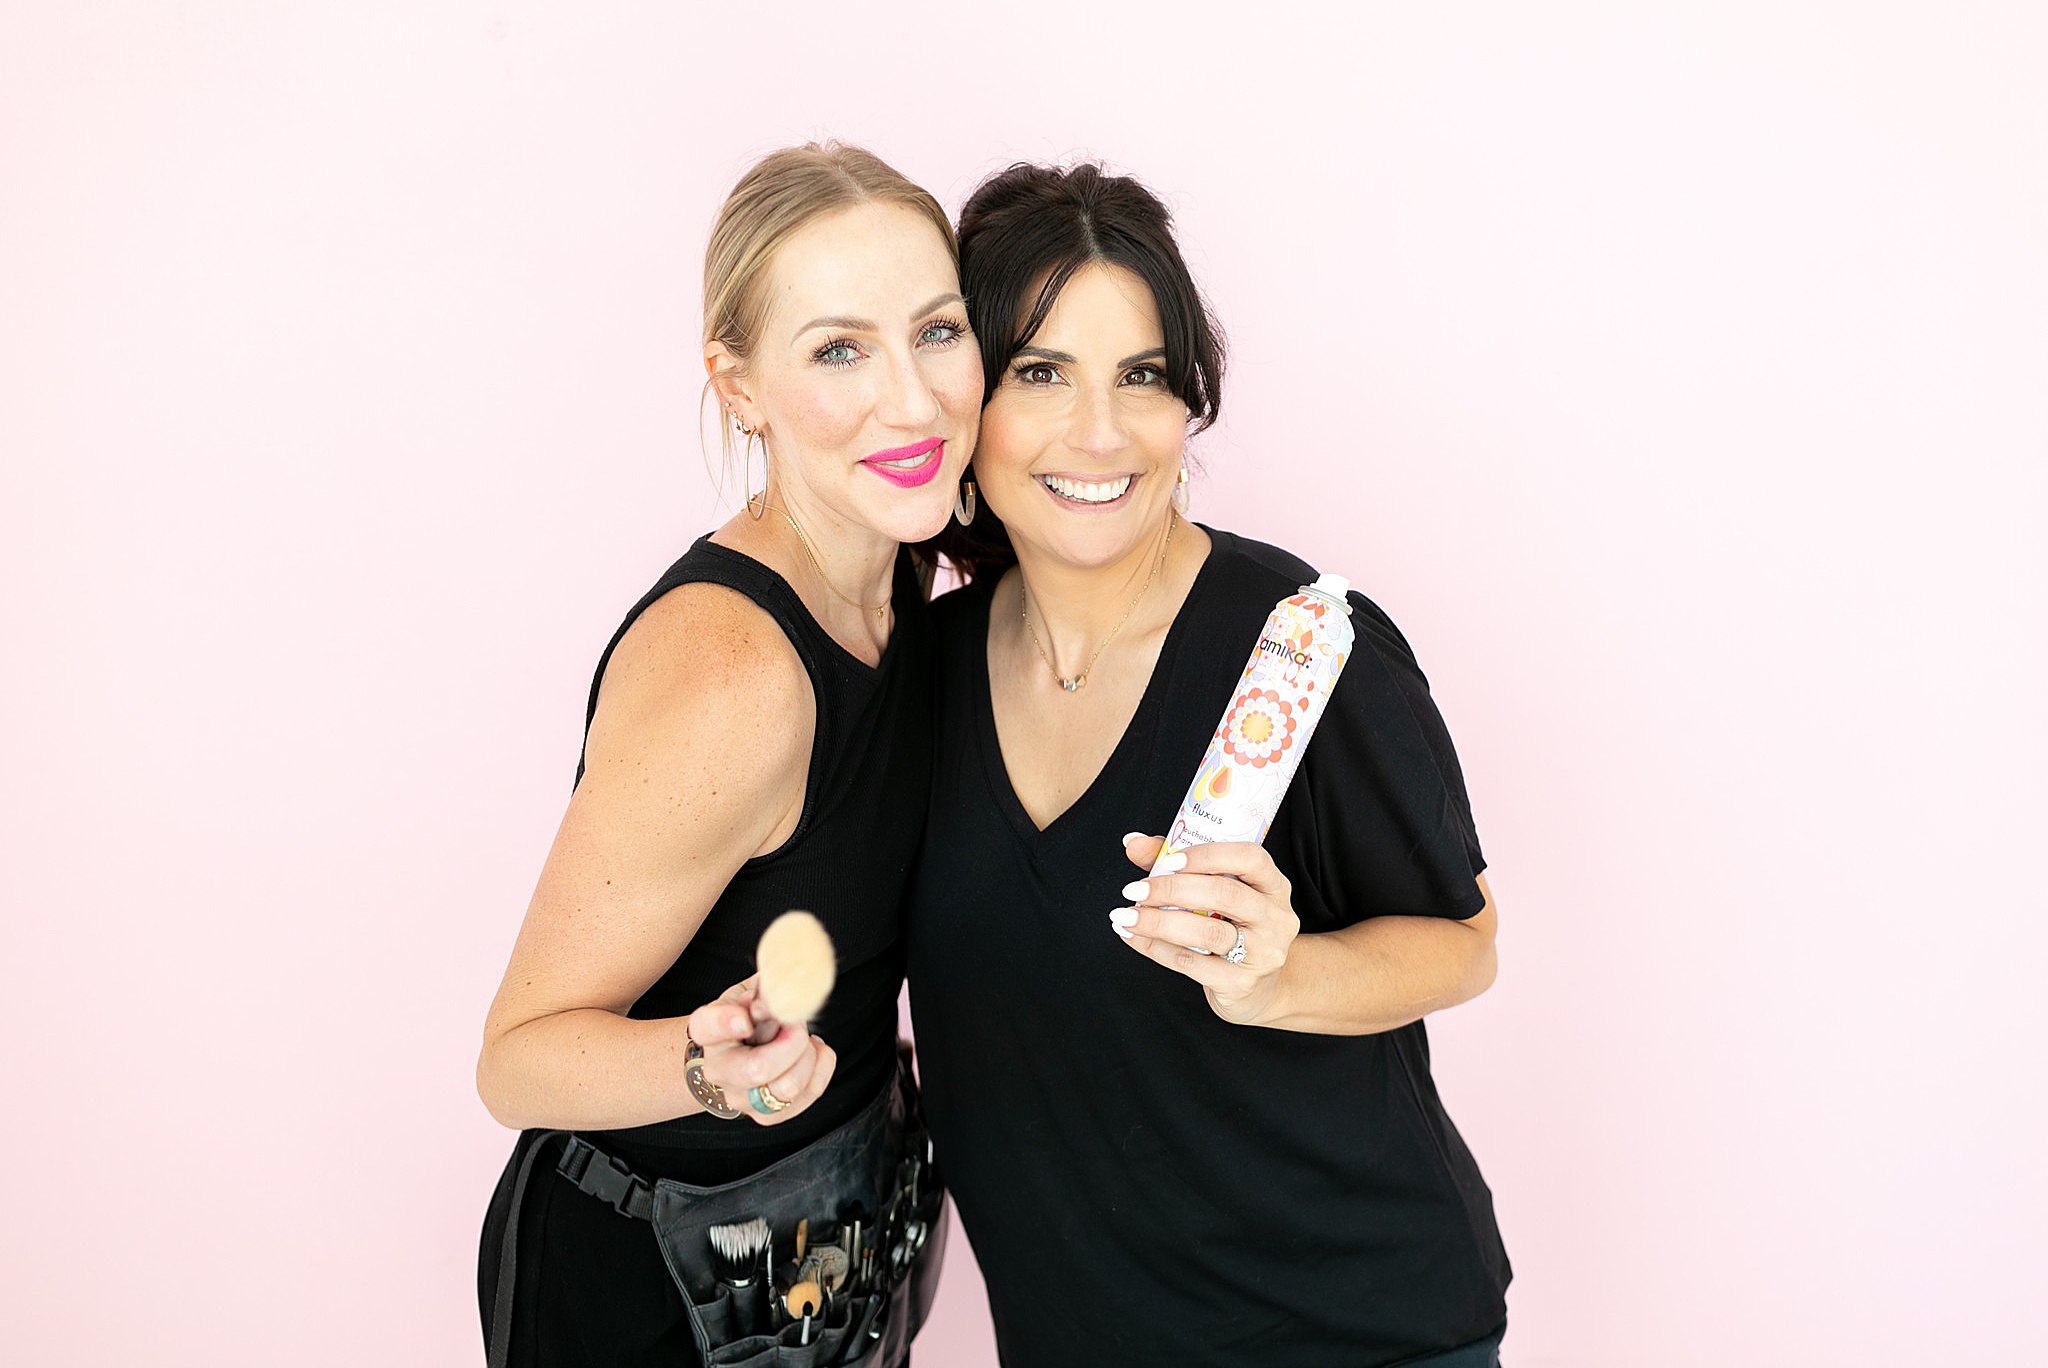 owners of Brite Beauty pose during commercial branding session